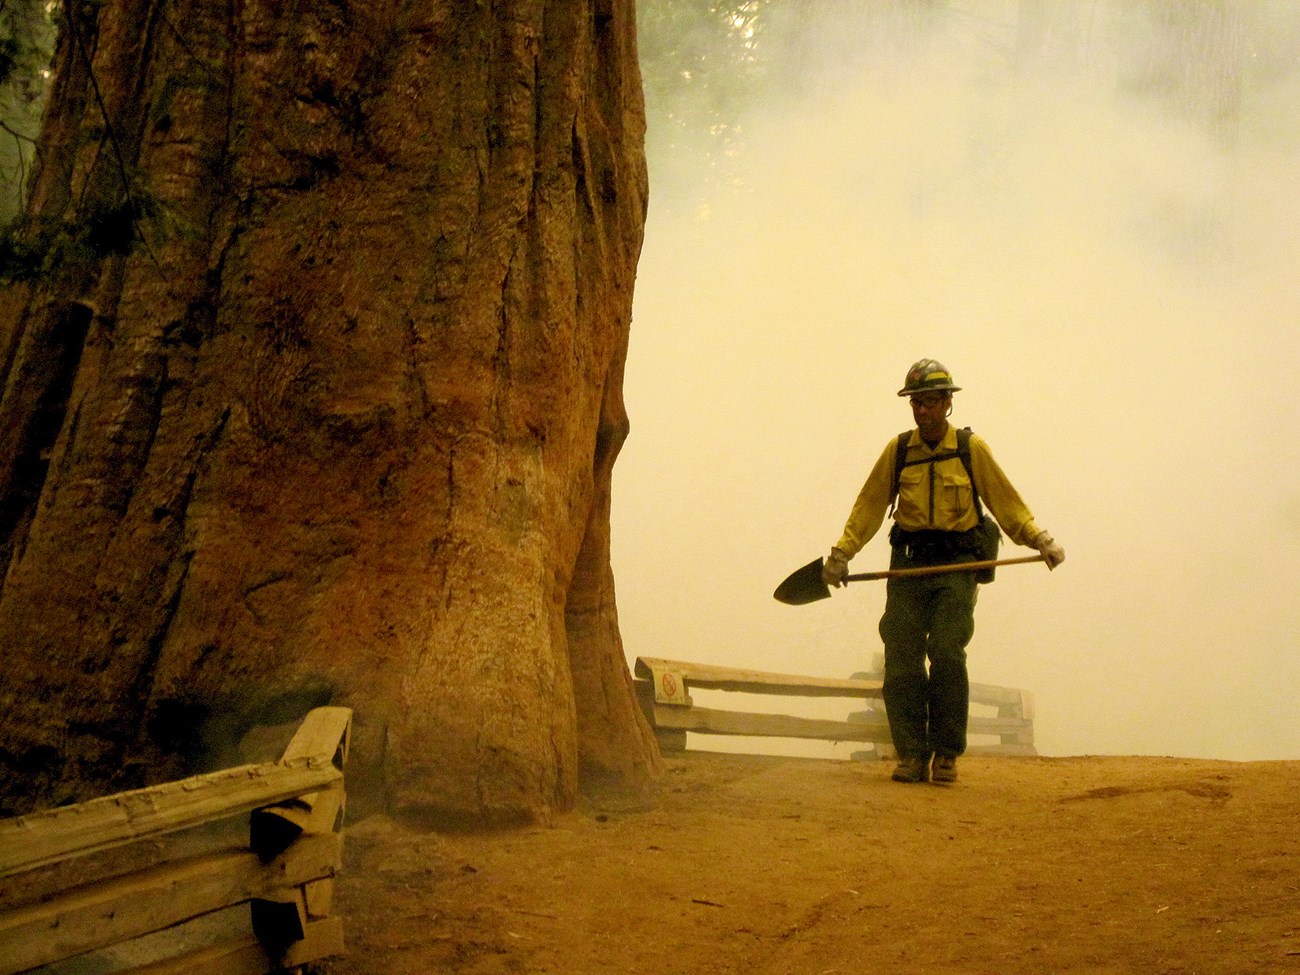 Firefighter walks next to a giant sequoia in a smoke-filled scene